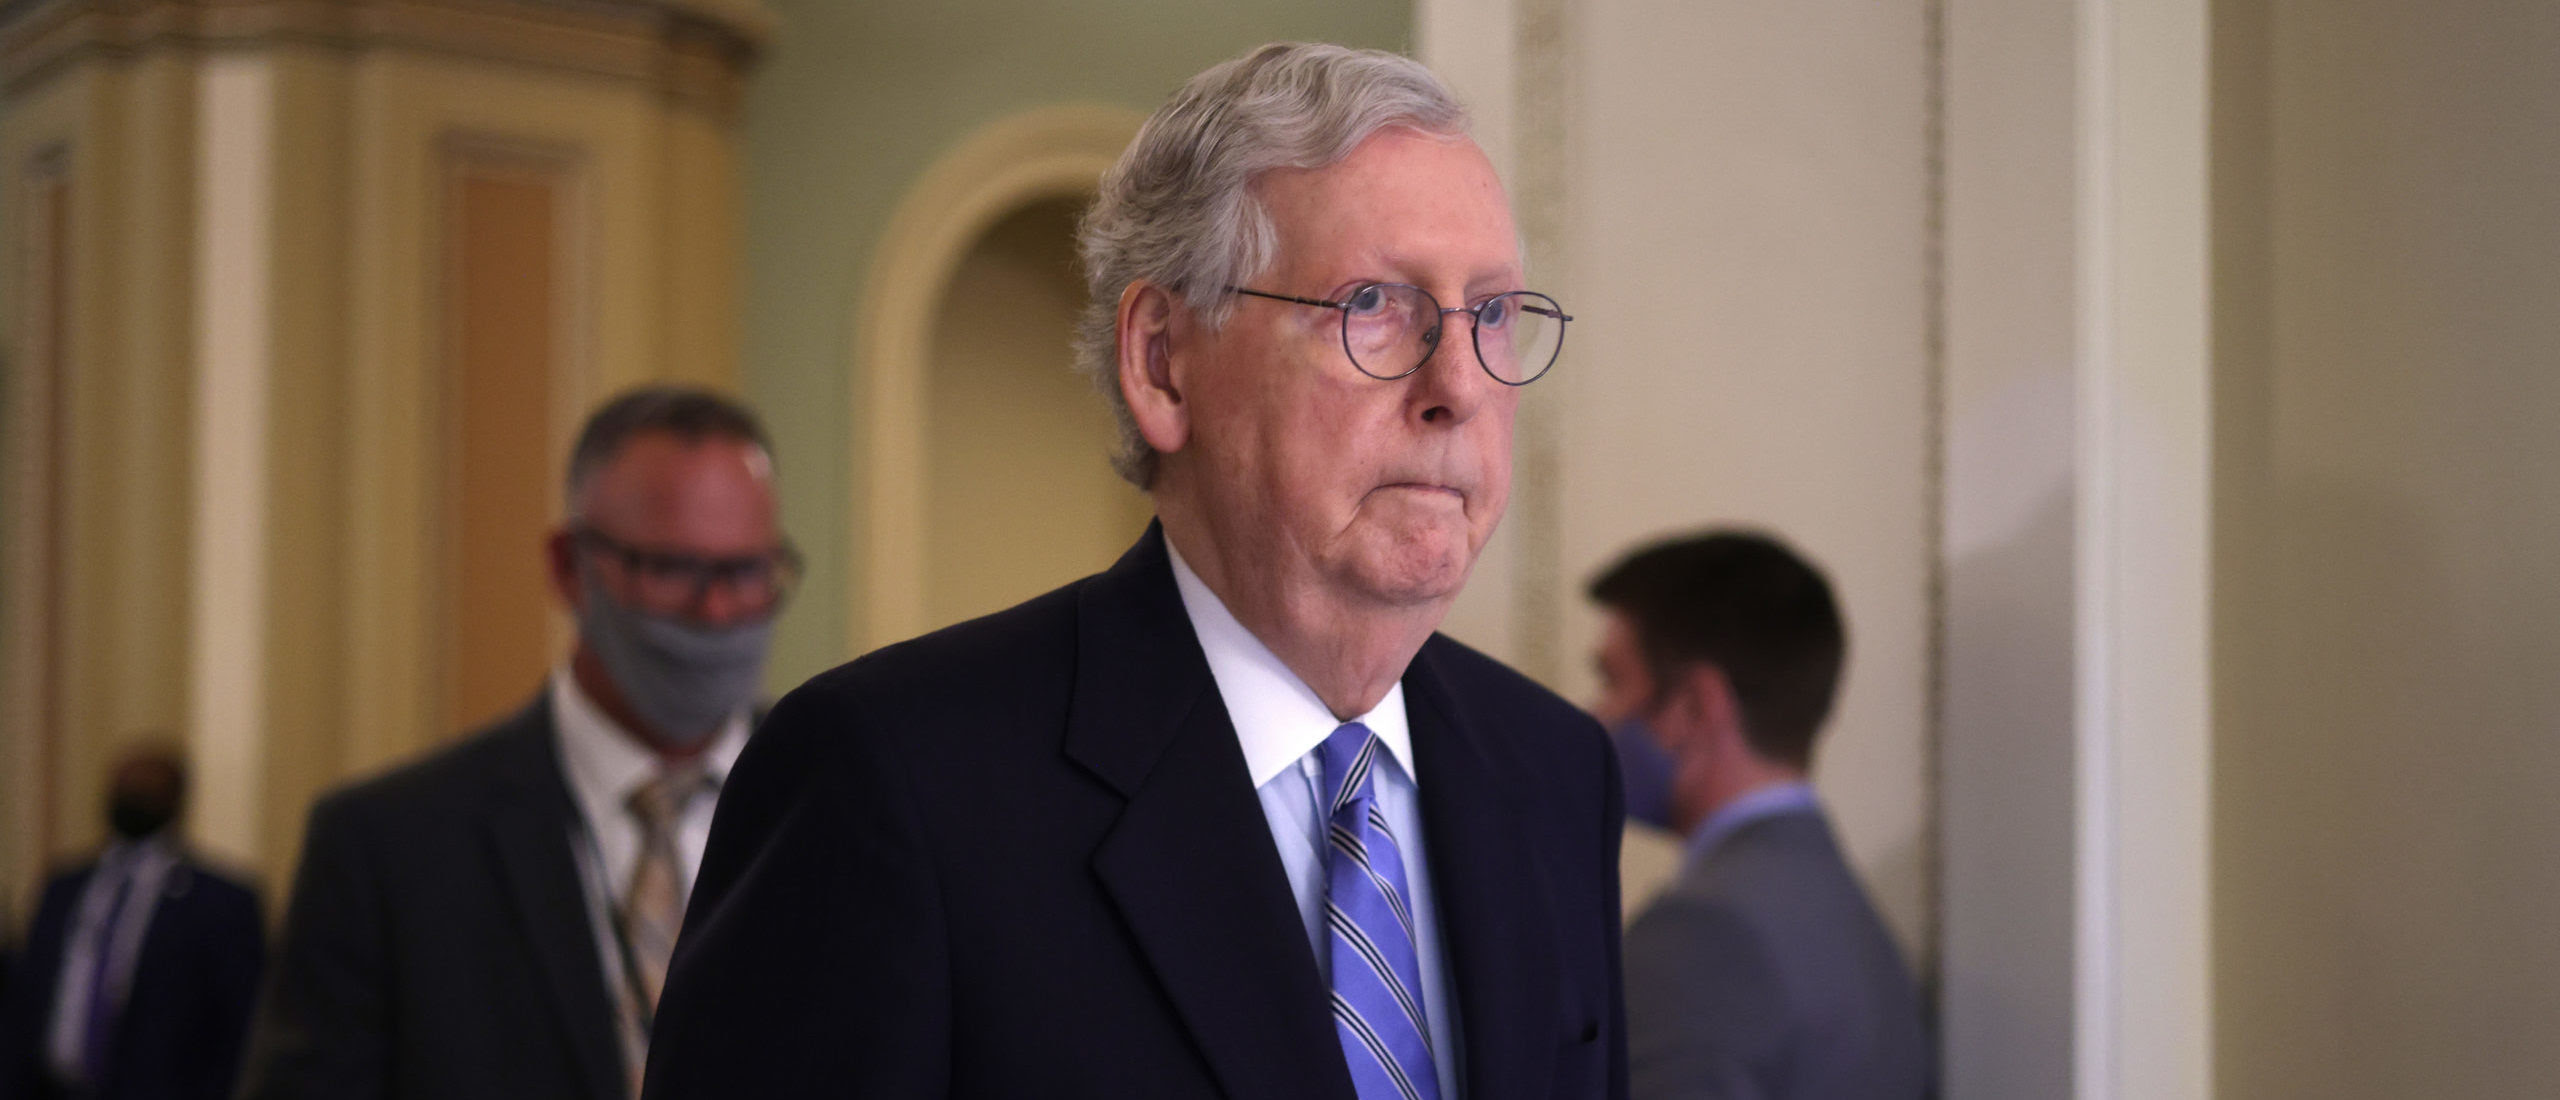 McConnell: Jan. 6 Committee Findings Are ‘Something The Public Needs To Know’